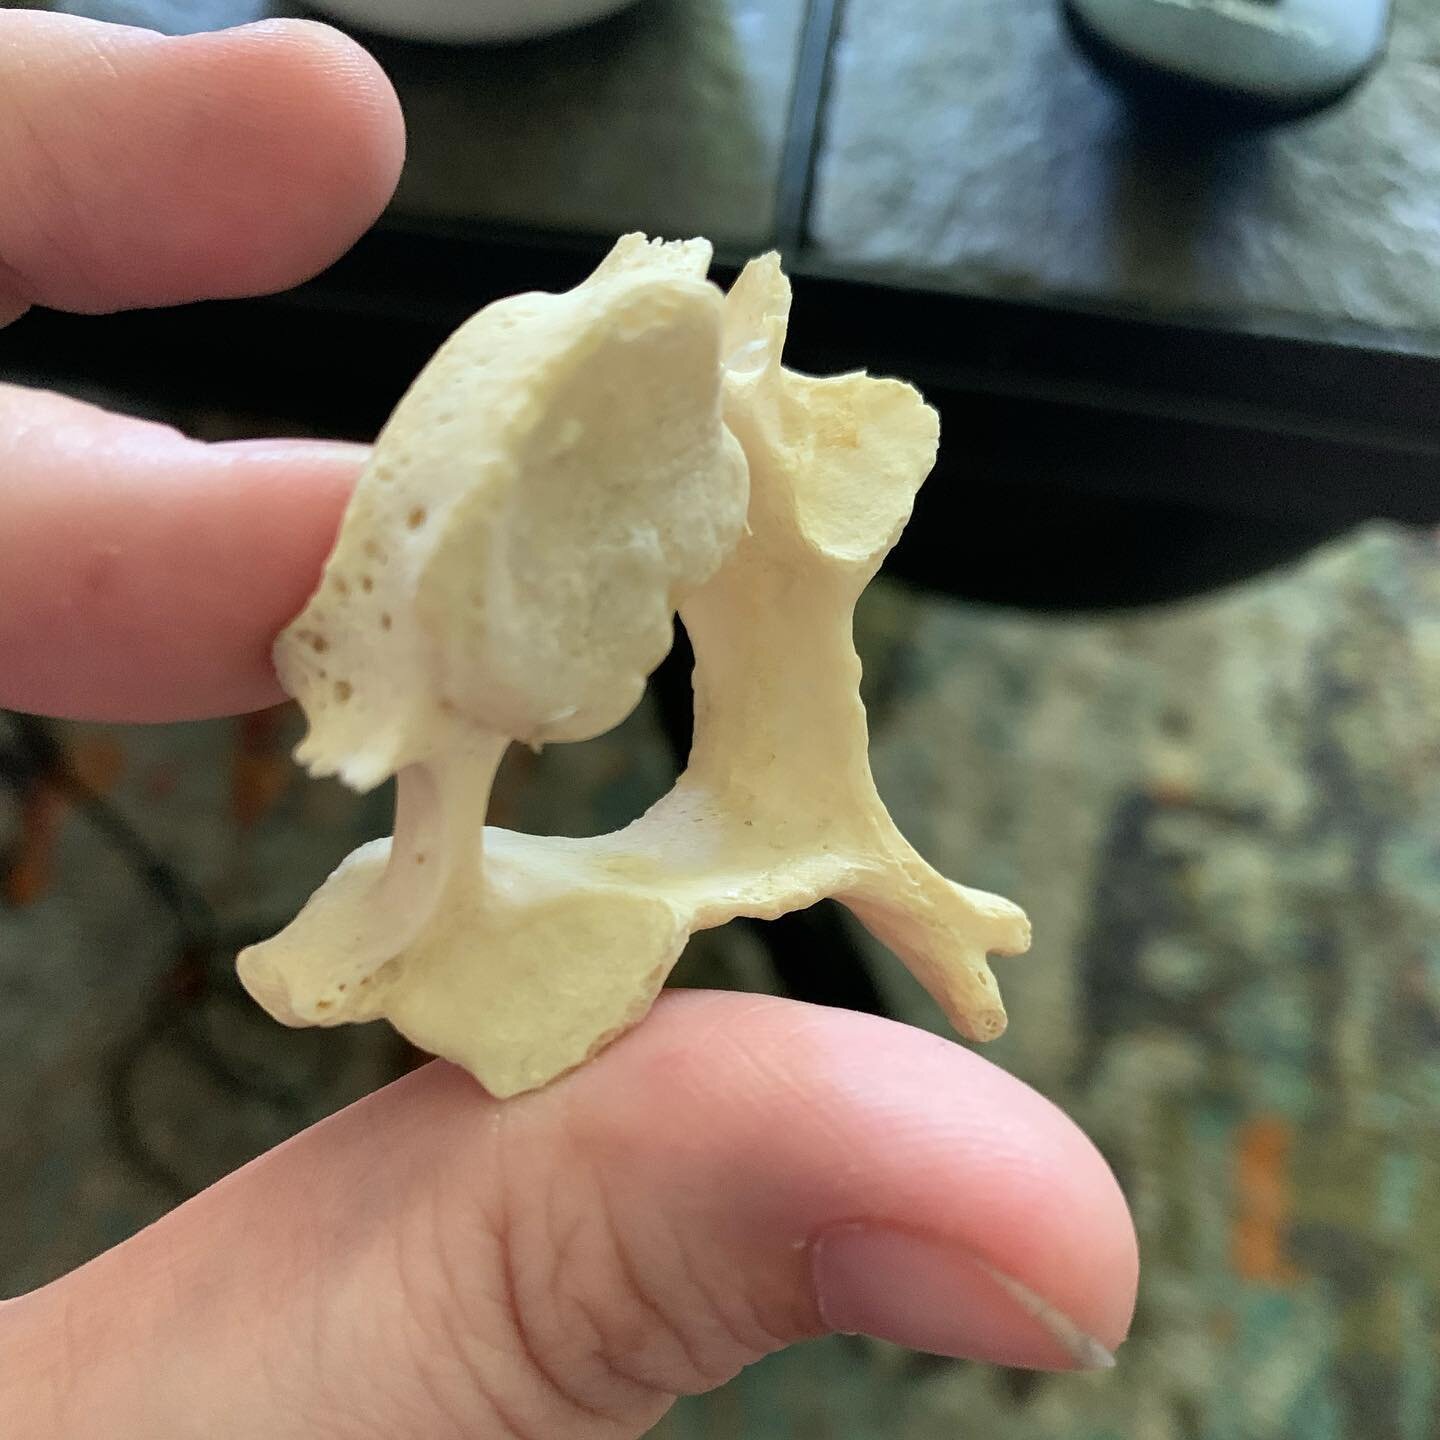 Ain&rsquo;t nothing like the real thing. My first real human cervical vertebrae. I cannot WAIT to draw you. Here&rsquo;s to my growing collection! I hope to host drawing groups in the near future. This medical illustrator is thrilled &amp; I&rsquo;ll